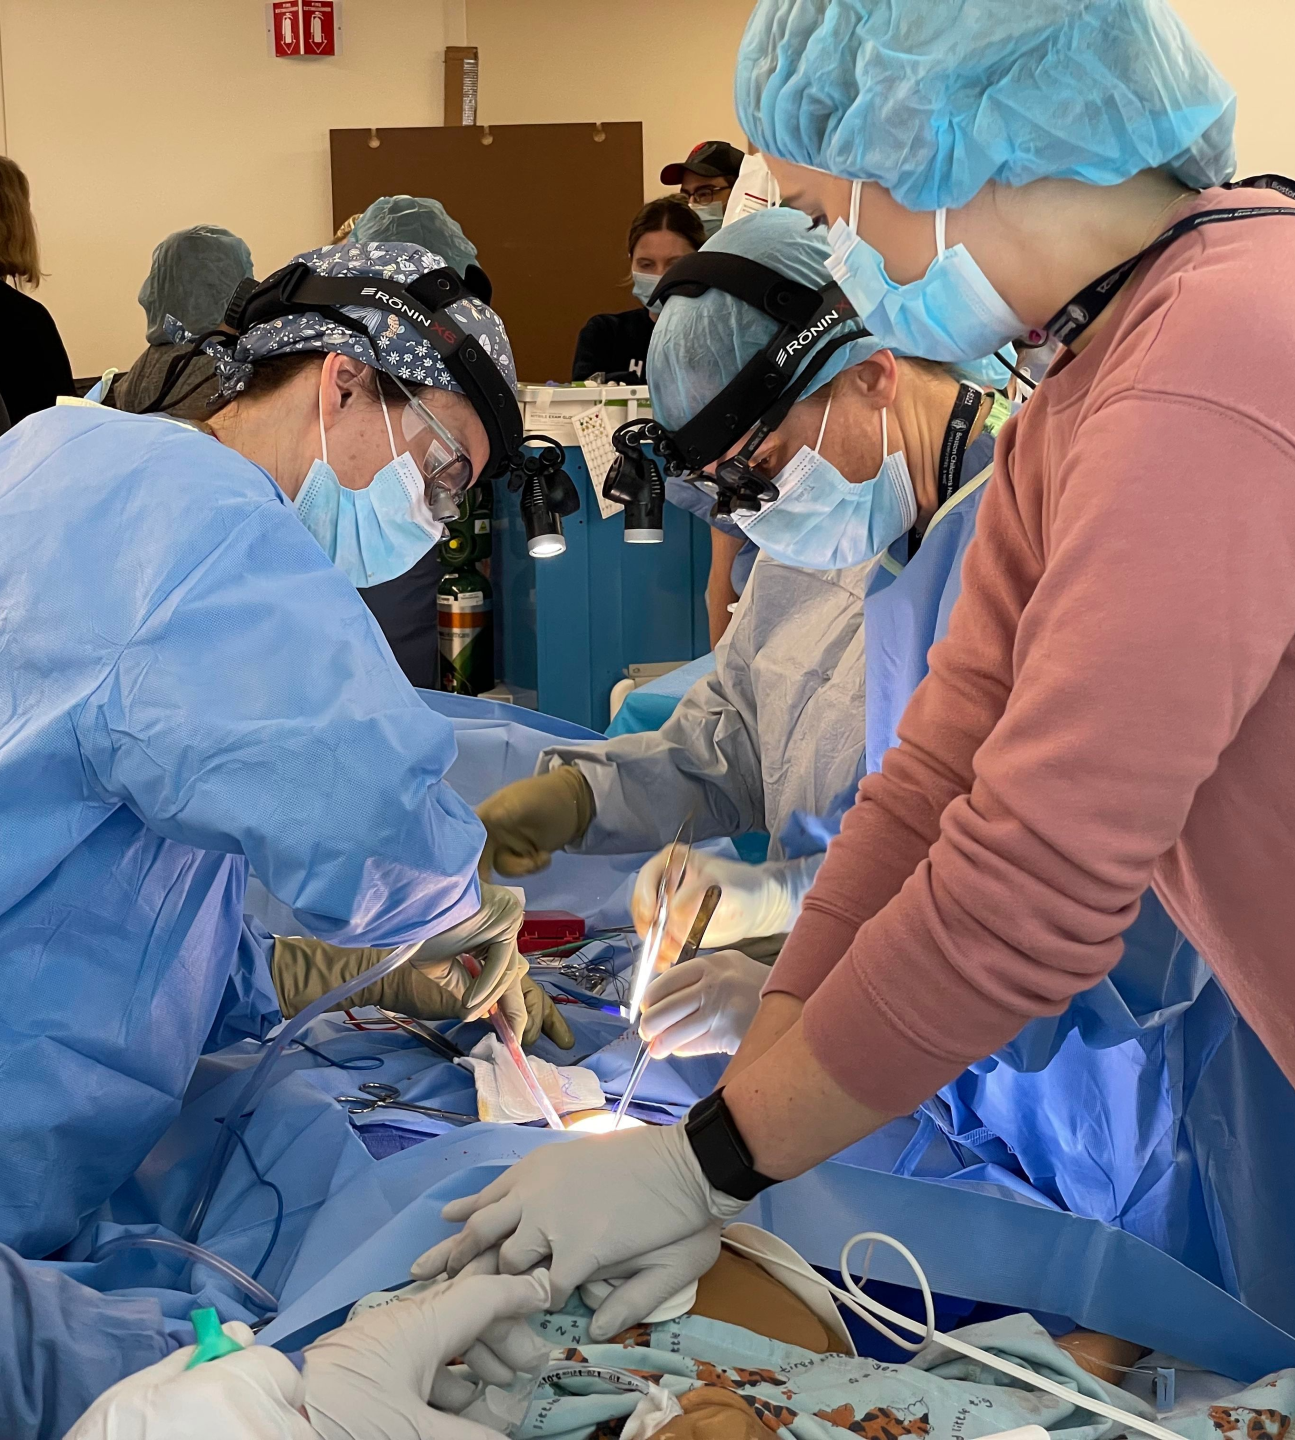 Two doctor in blue scrubs, surgical face masks, and a trainee in a pink sweatshirt practice an operation on a simulation.